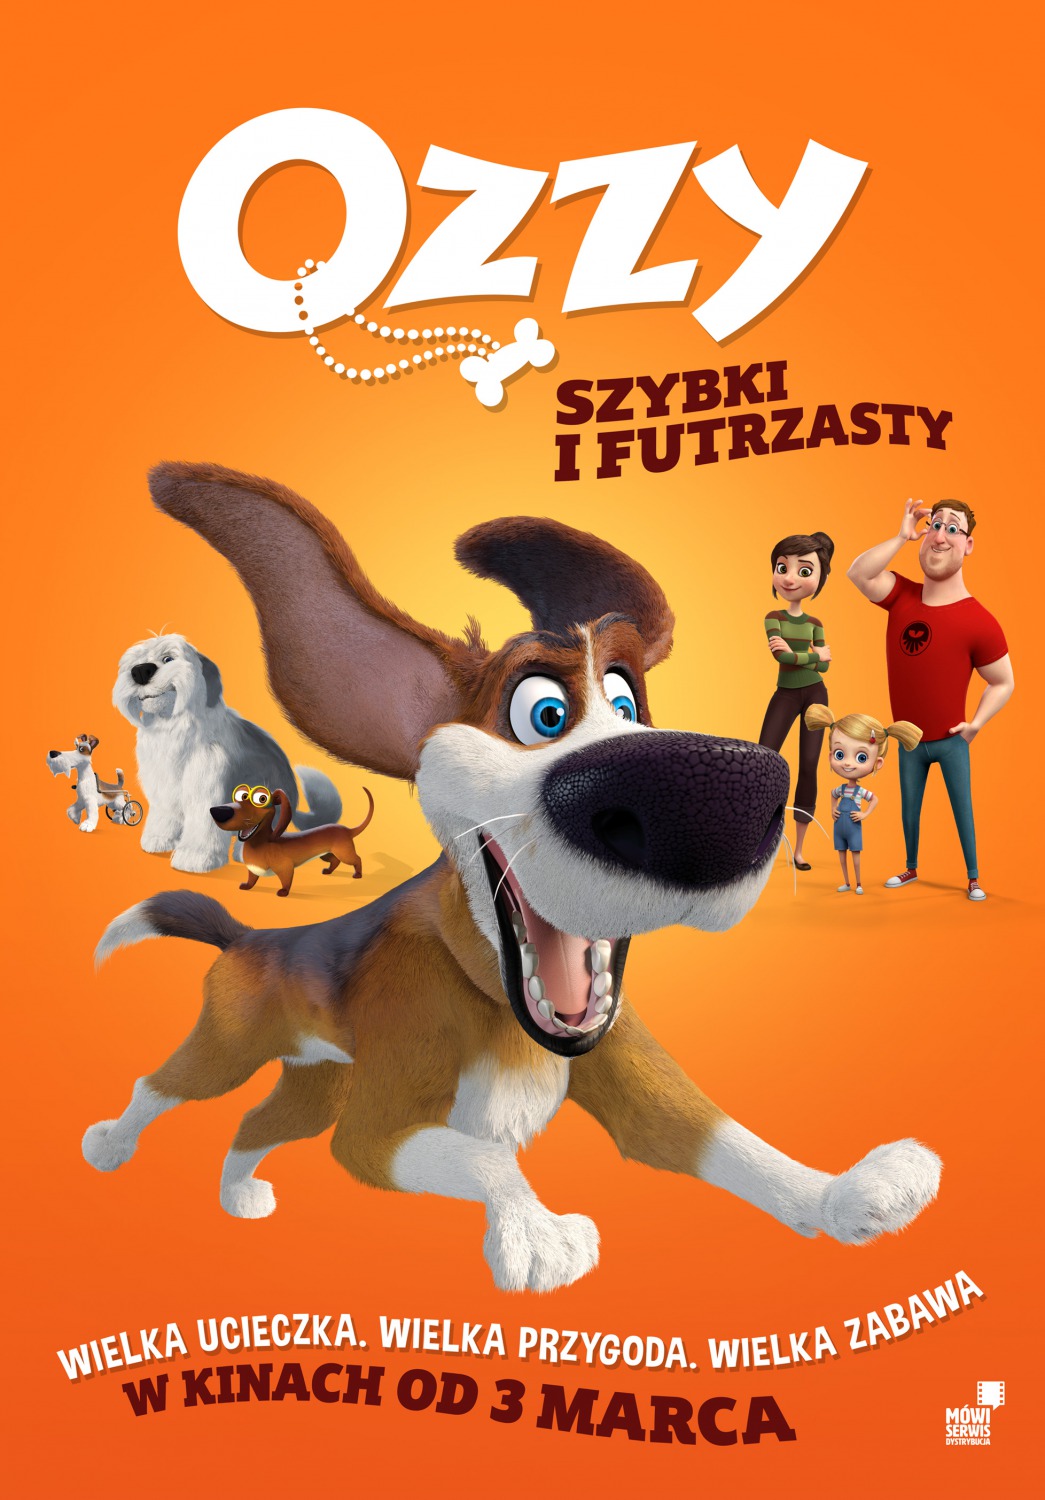 Extra Large Movie Poster Image for Ozzy (#3 of 5)